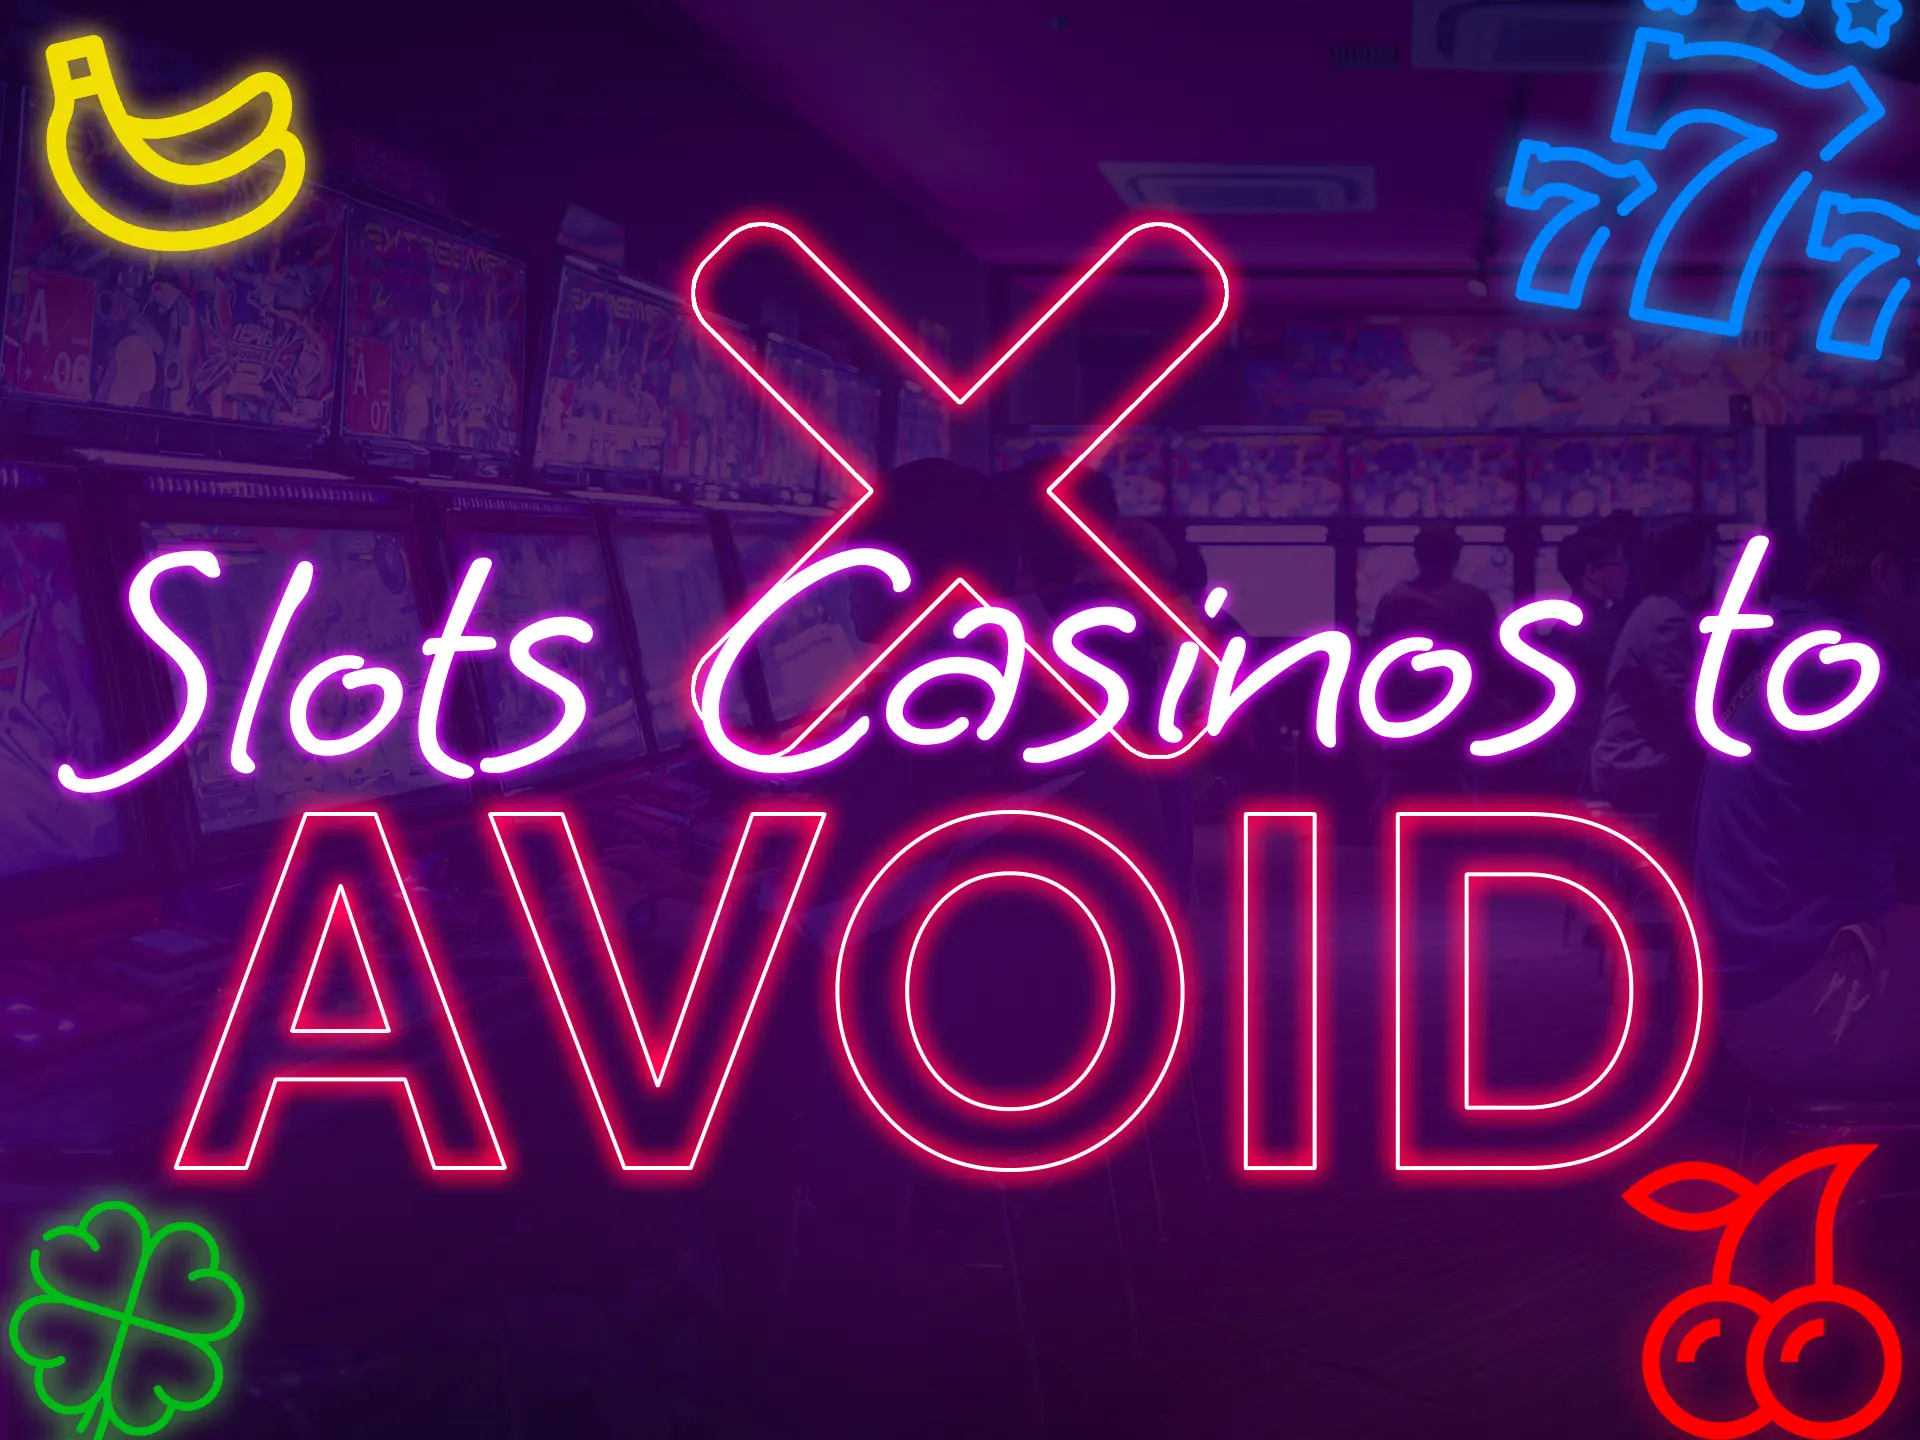 Be careful if you see these slot games in suggestions.